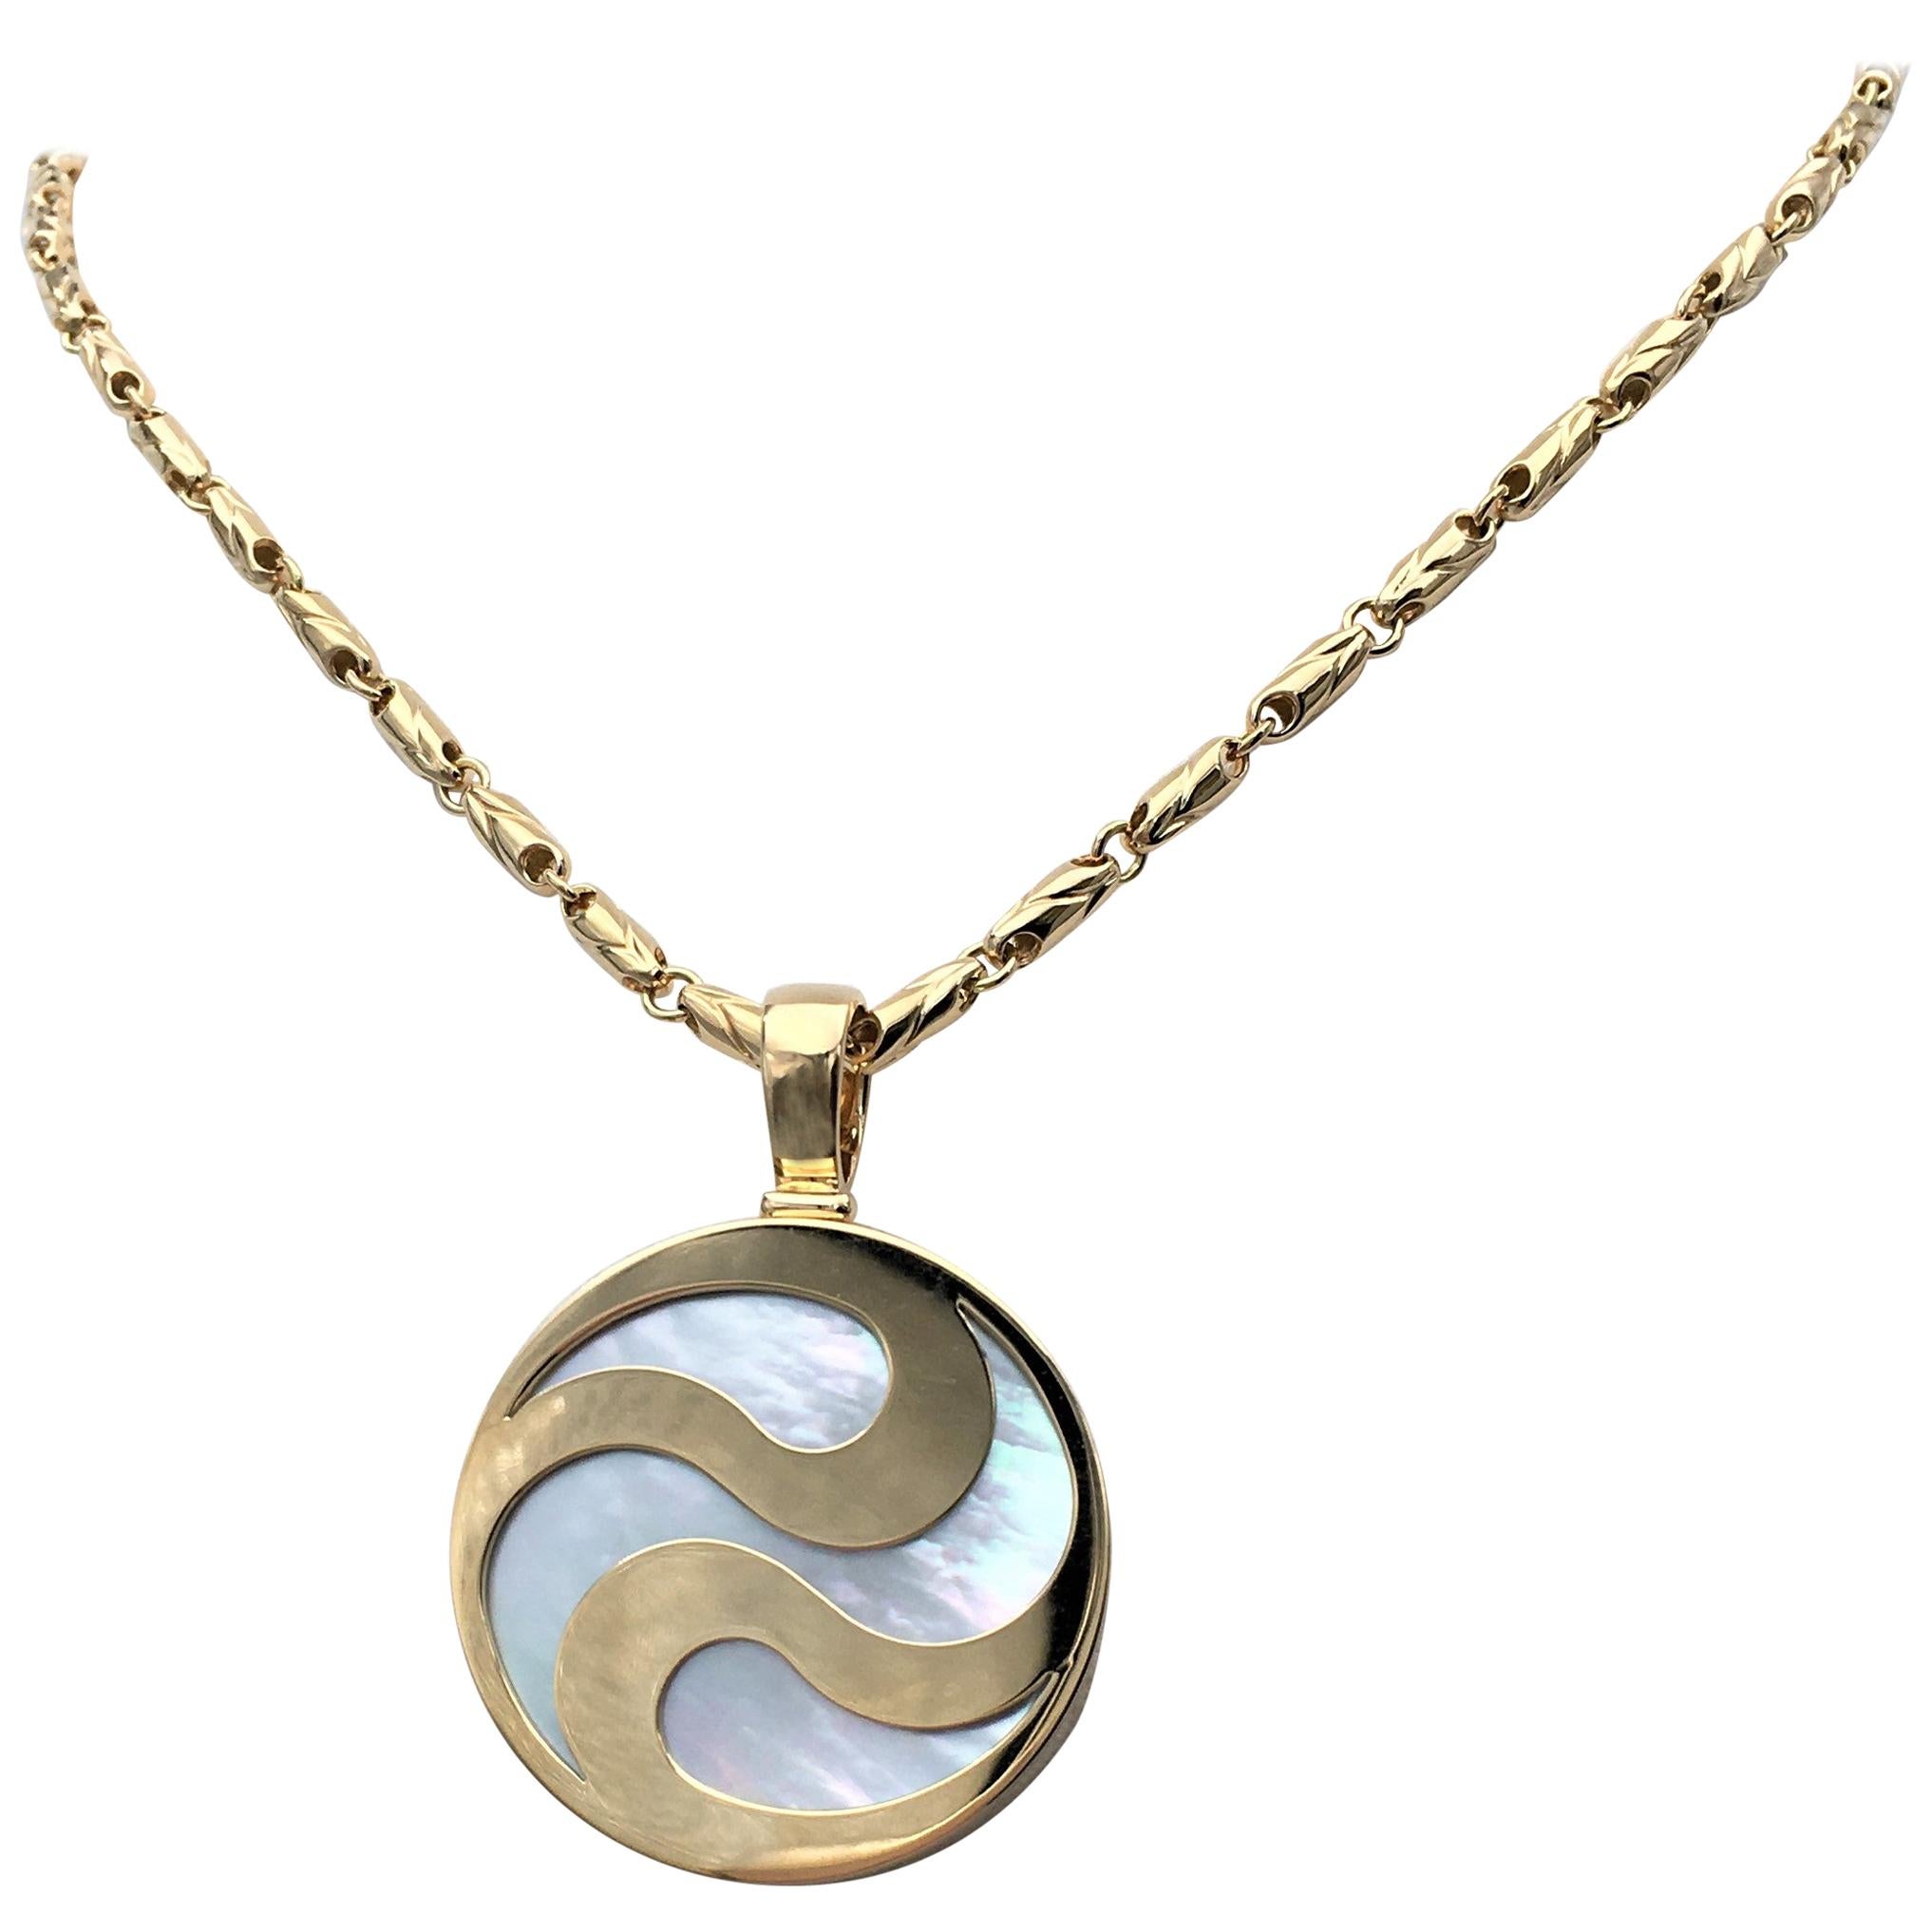 Bulgari Gold and Mother of Pearl Spinning Yin Yang Pendant Necklace